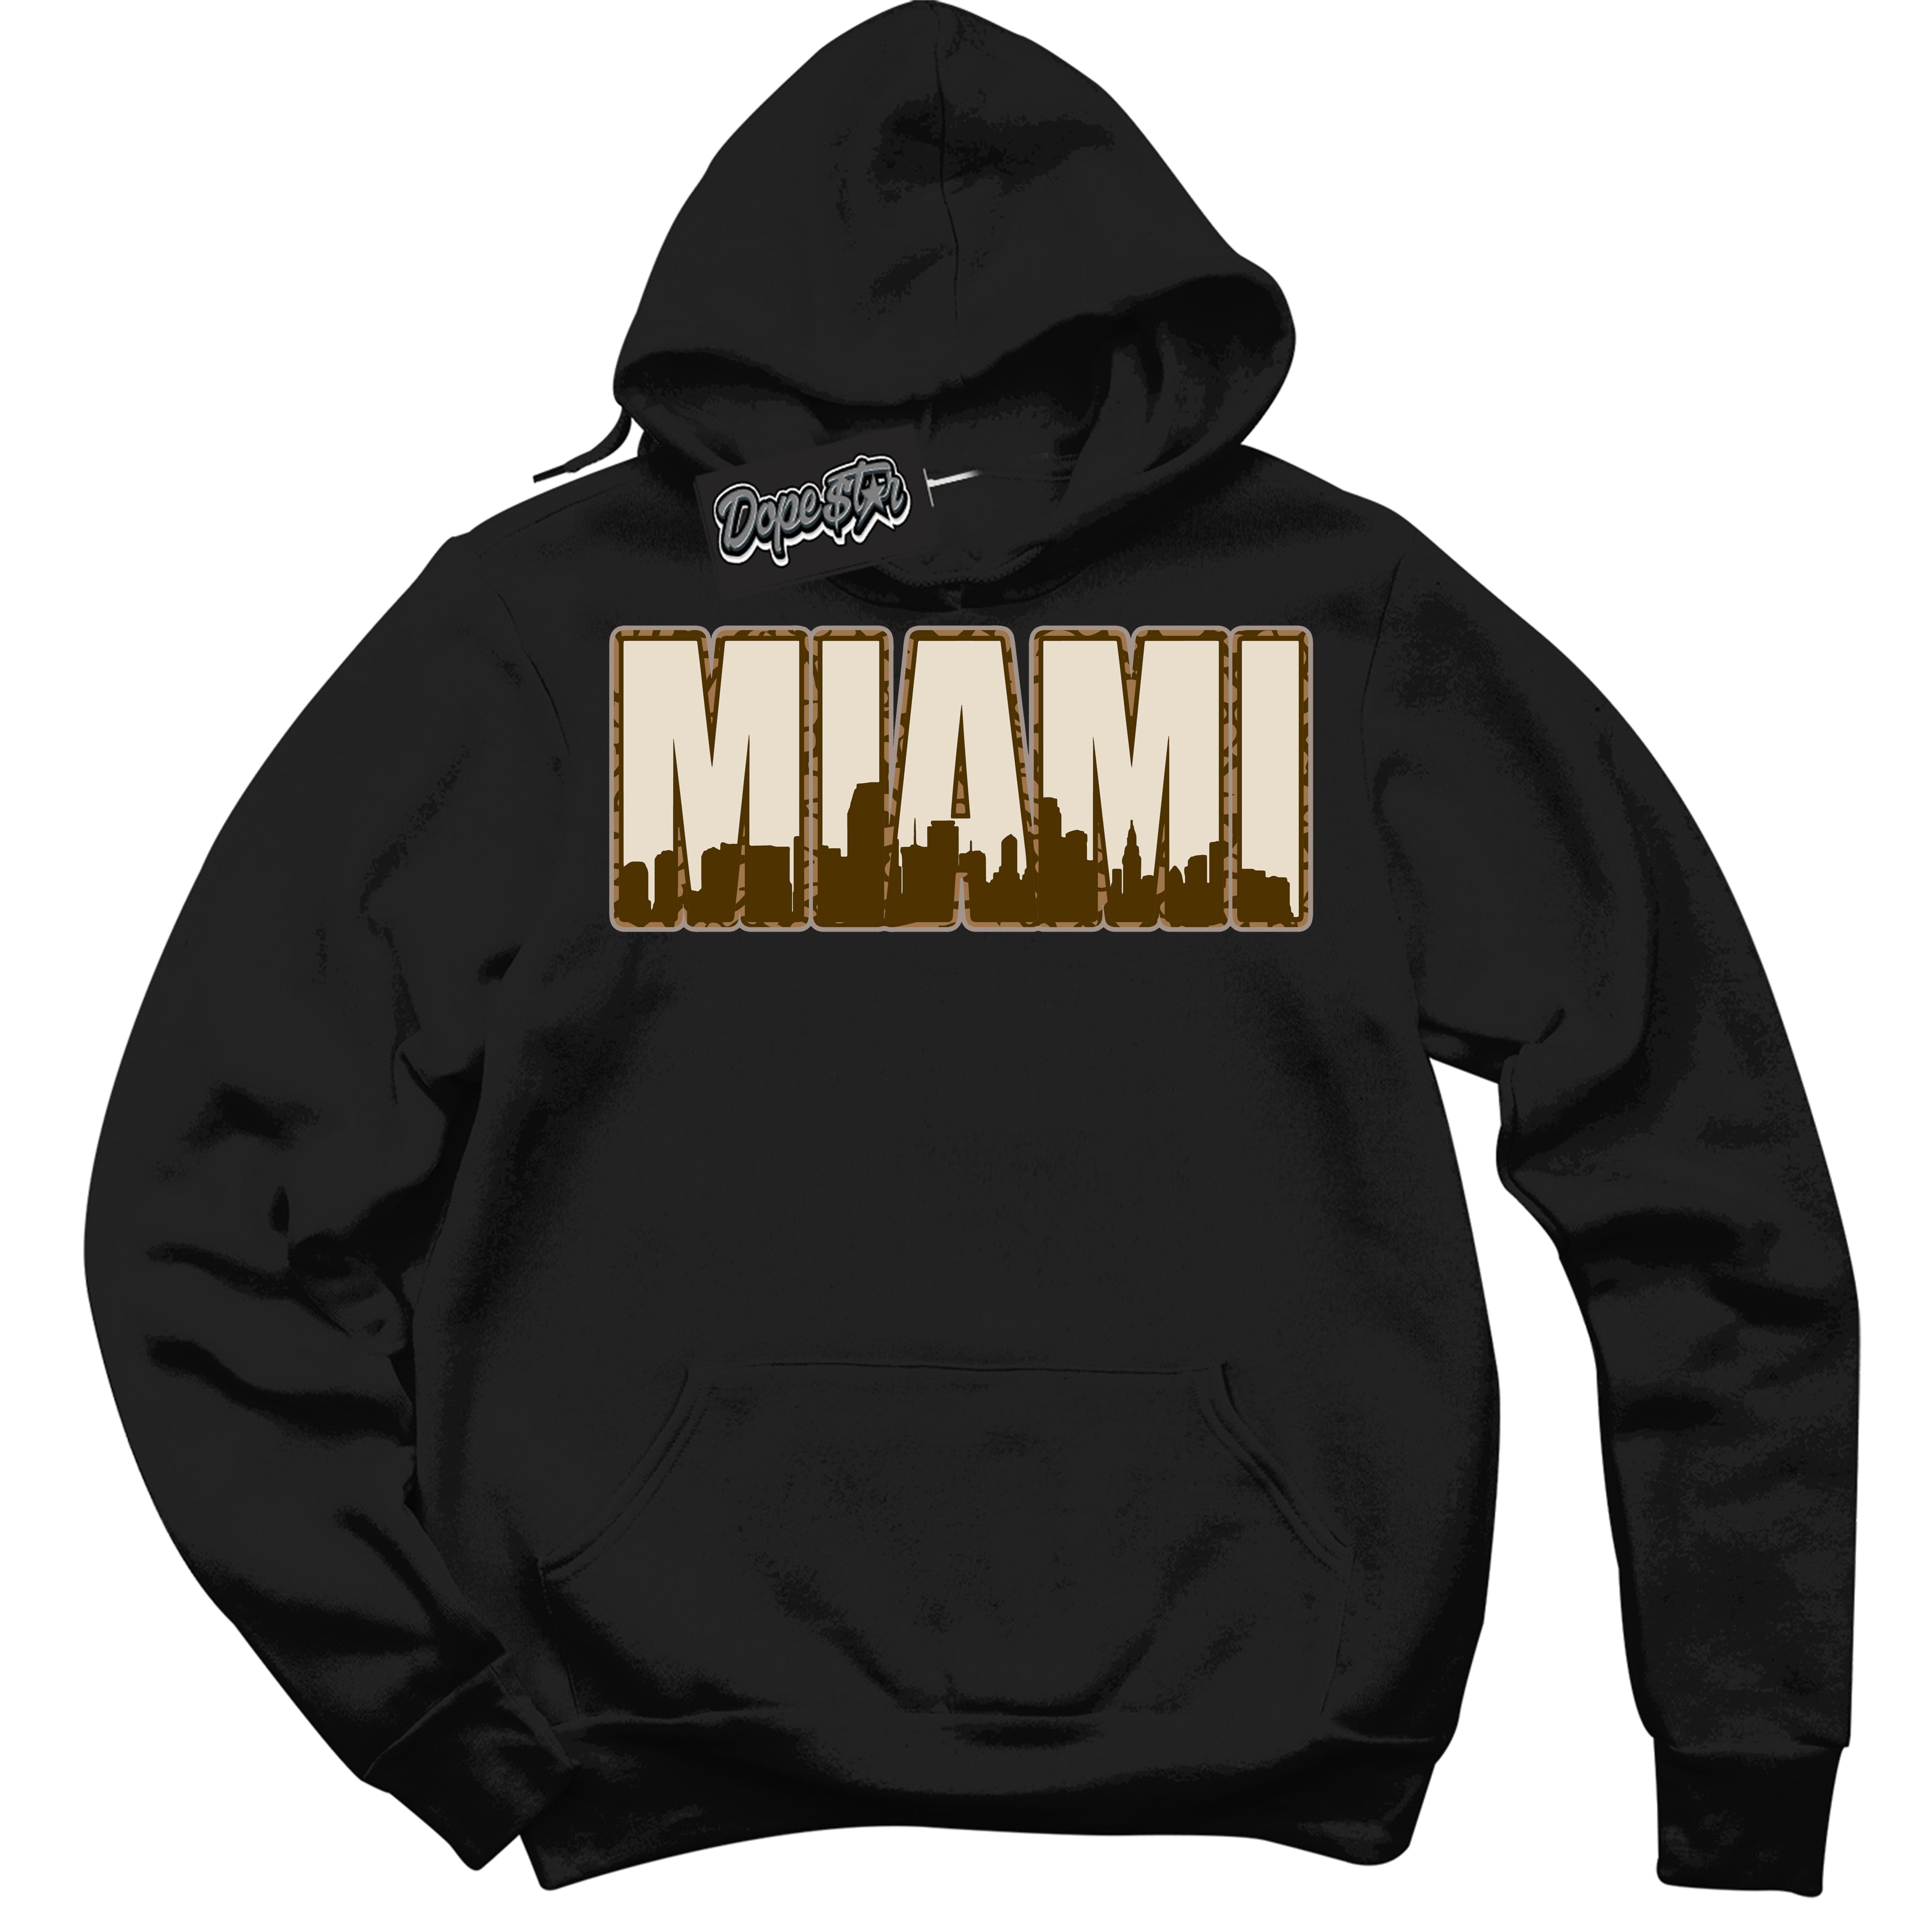 Cool Black Graphic DopeStar Hoodie with “ Miami “ print, that perfectly matches Palomino 3s sneakers